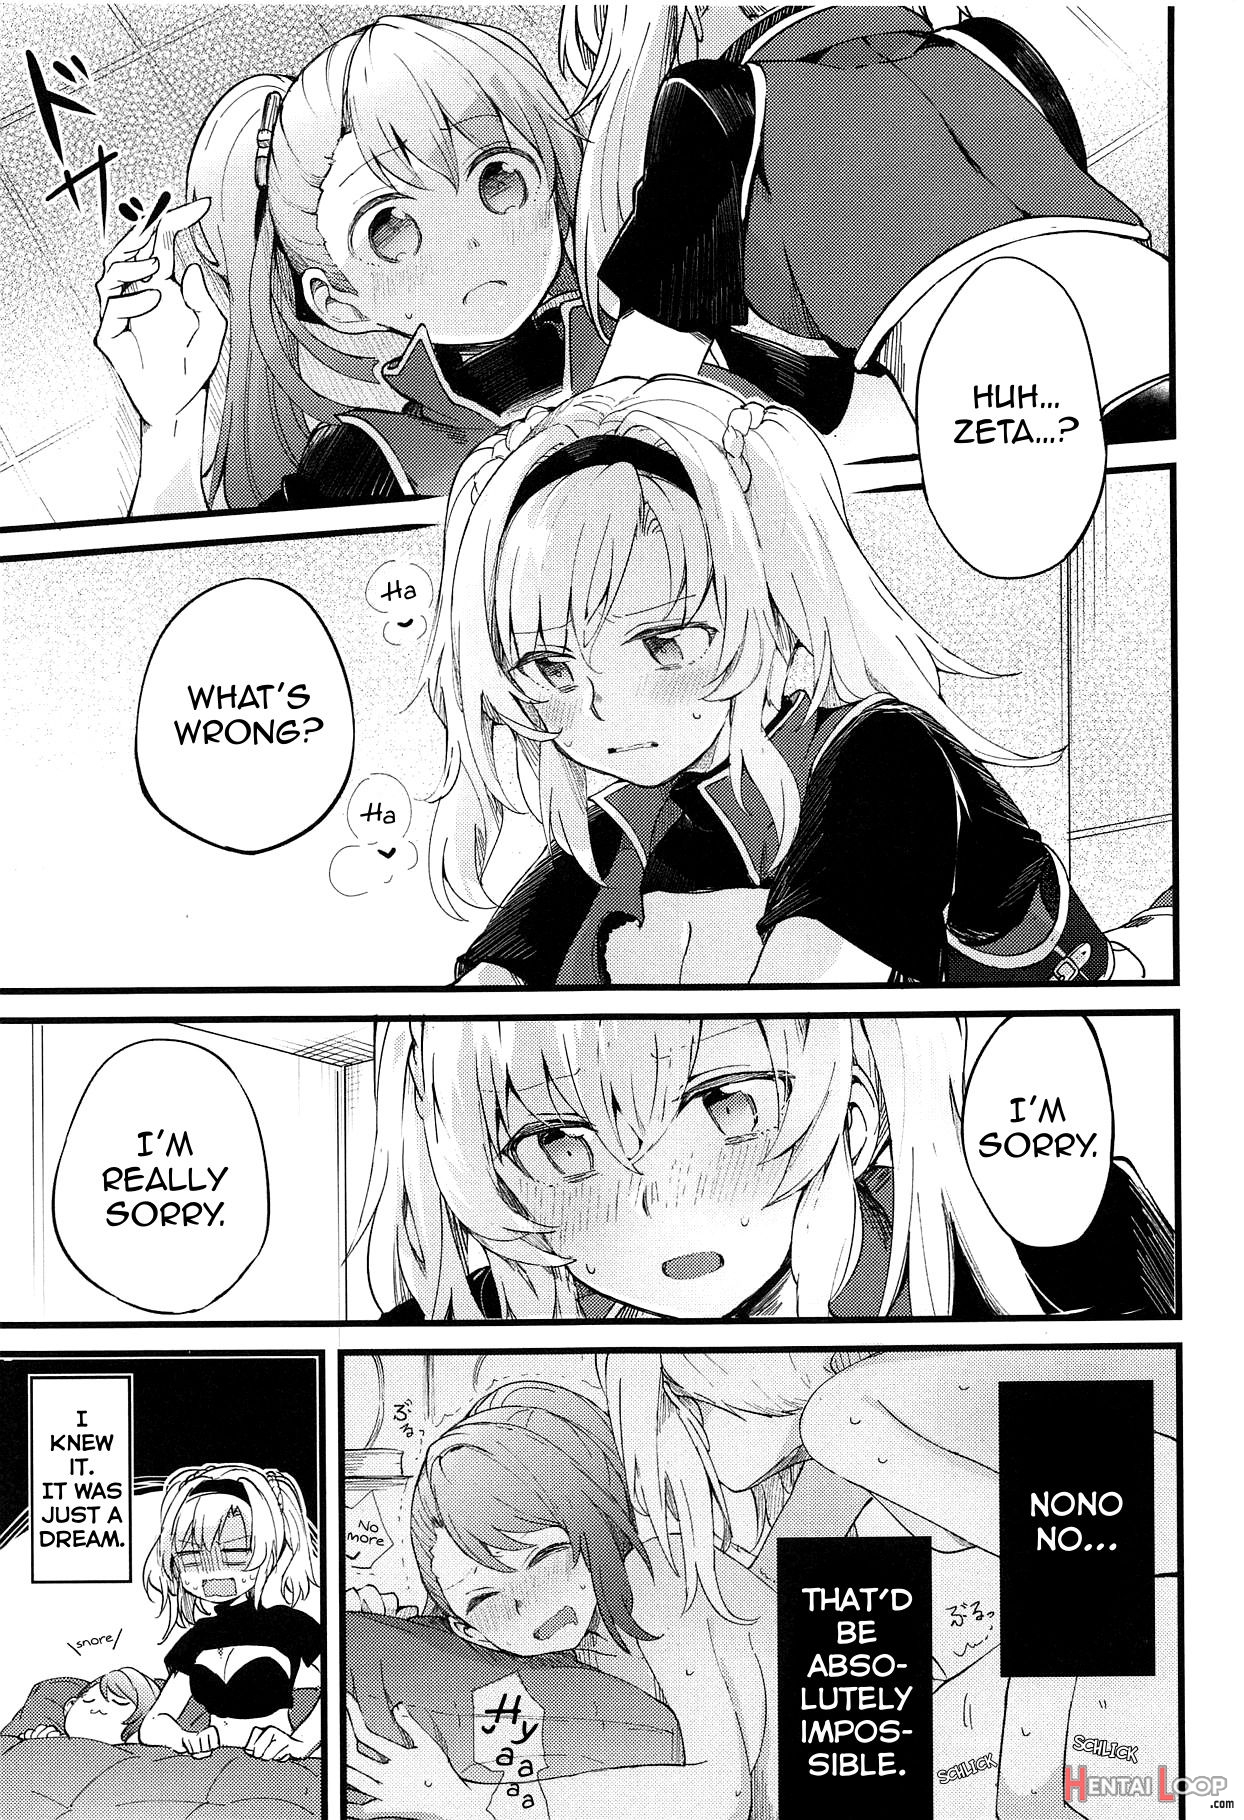 I Want To Have Sex With My Favorite Girl Erokawa_senpai] page 2